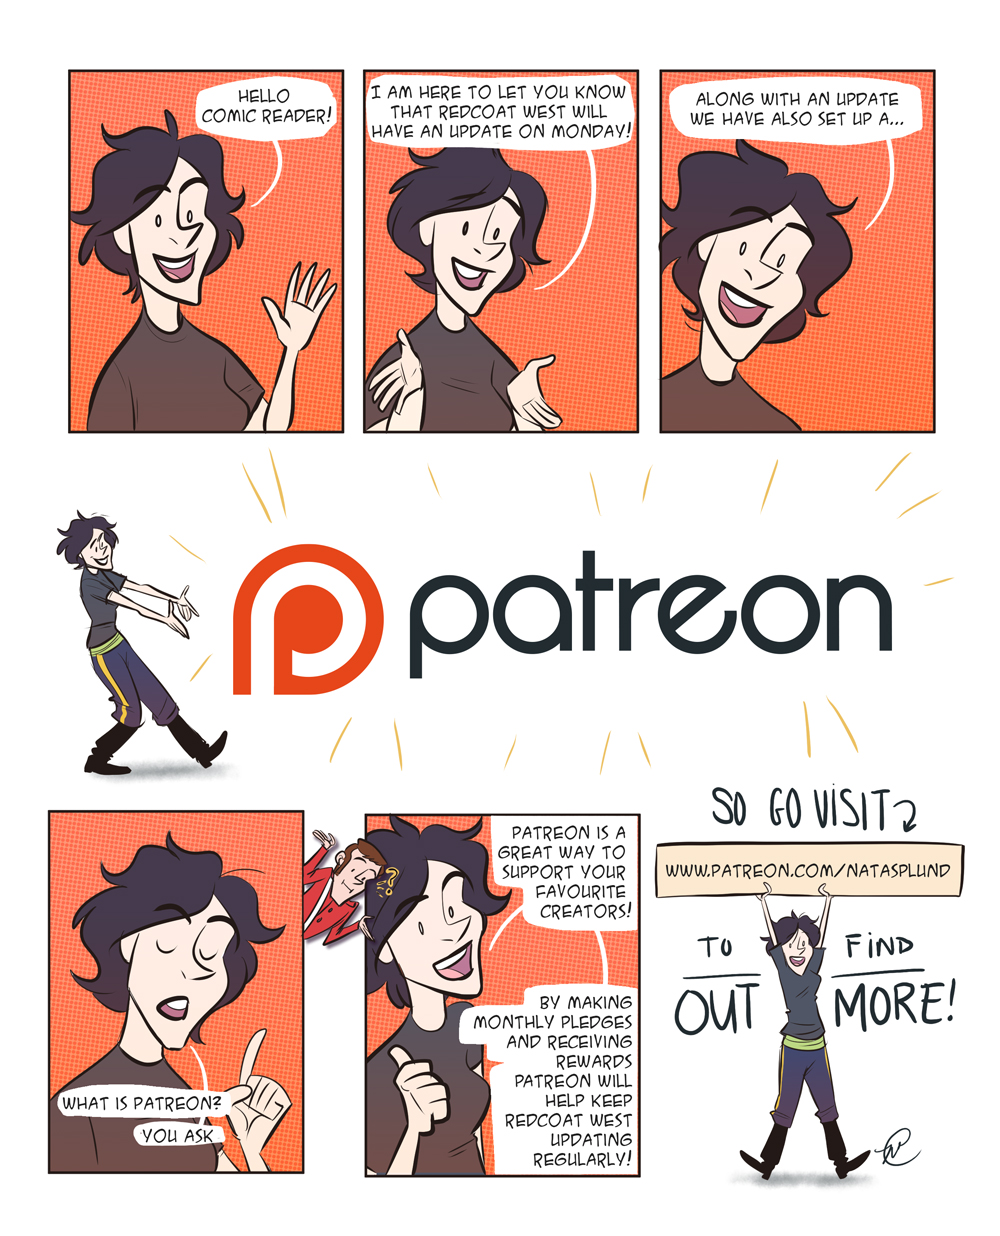 New Page on Monday, and Patreon!!